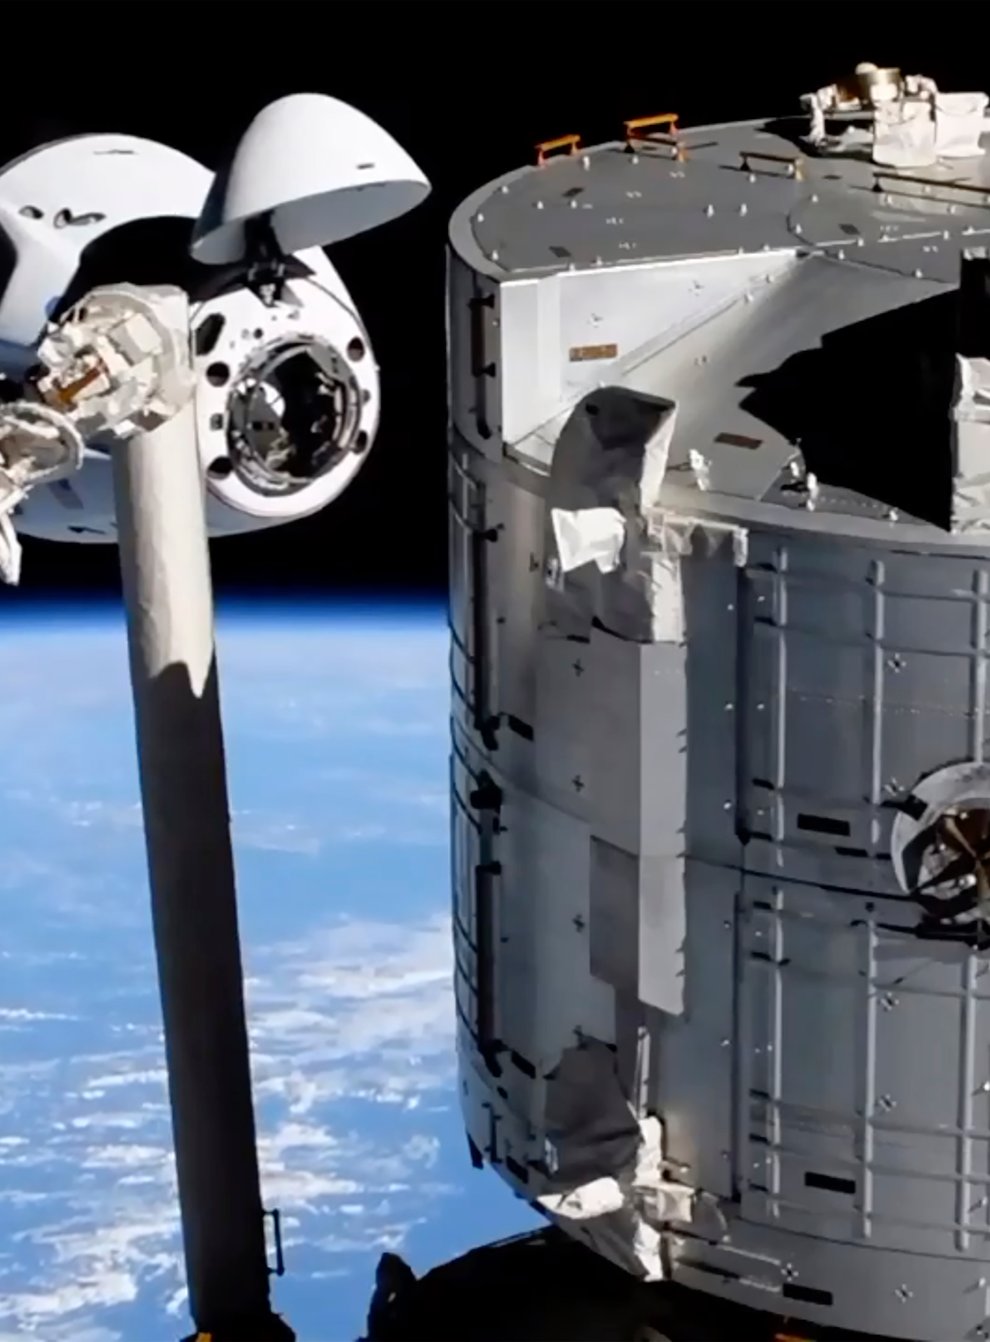 The SpaceX Crew Dragon spacecraft, left, approaches the International Space Station